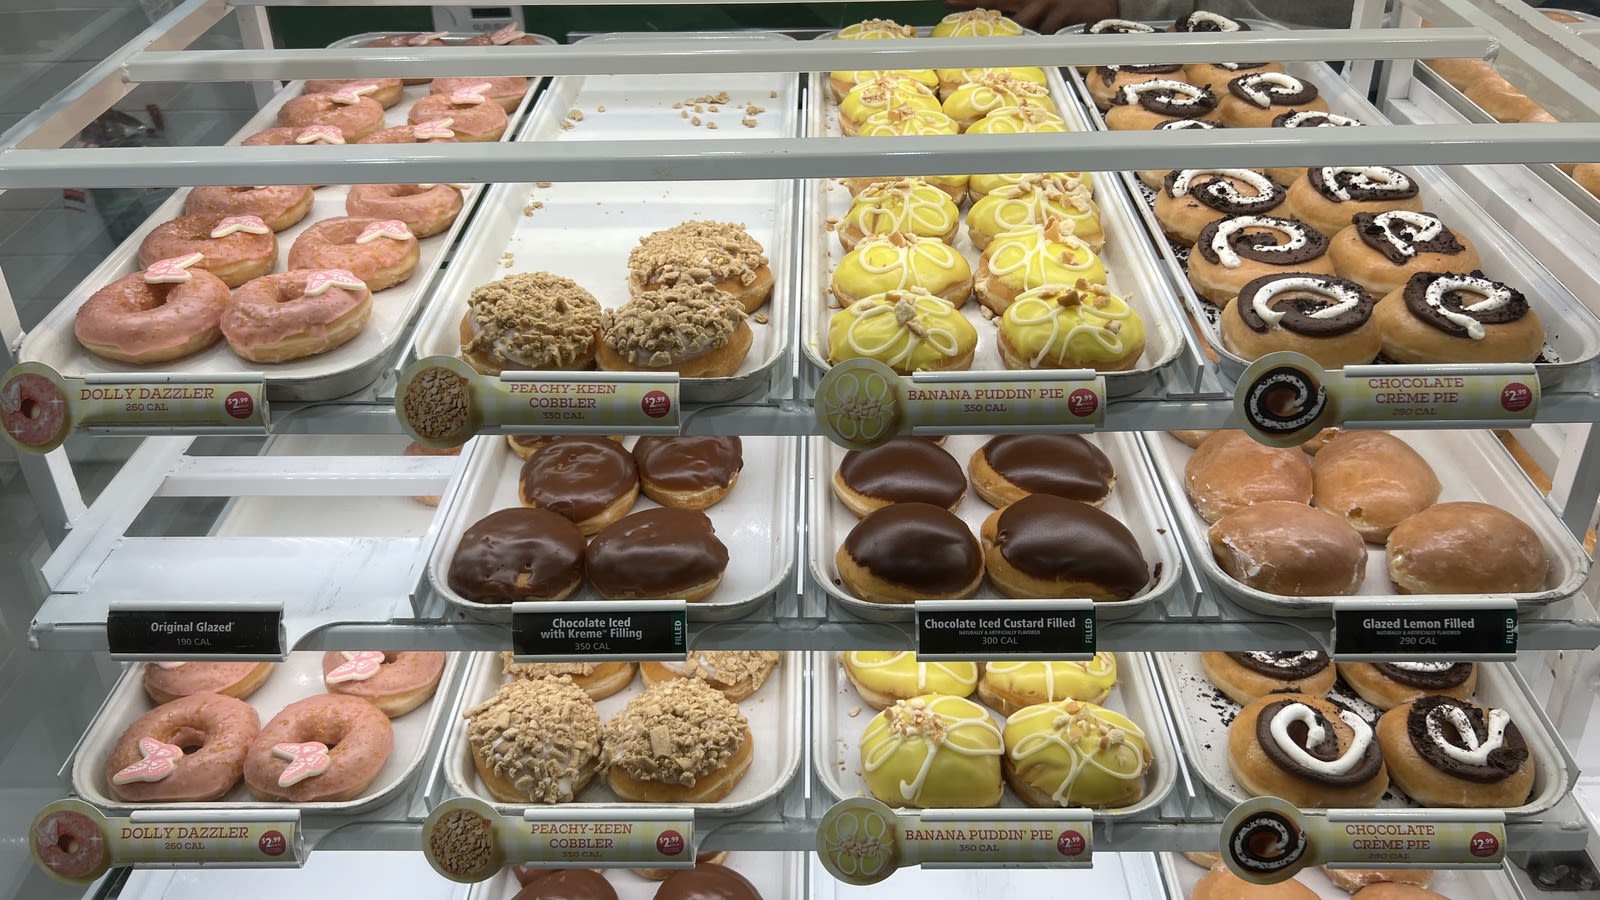 An Honest Review Of Krispy Kreme's Dolly Parton Southern Sweets Doughnut Collection